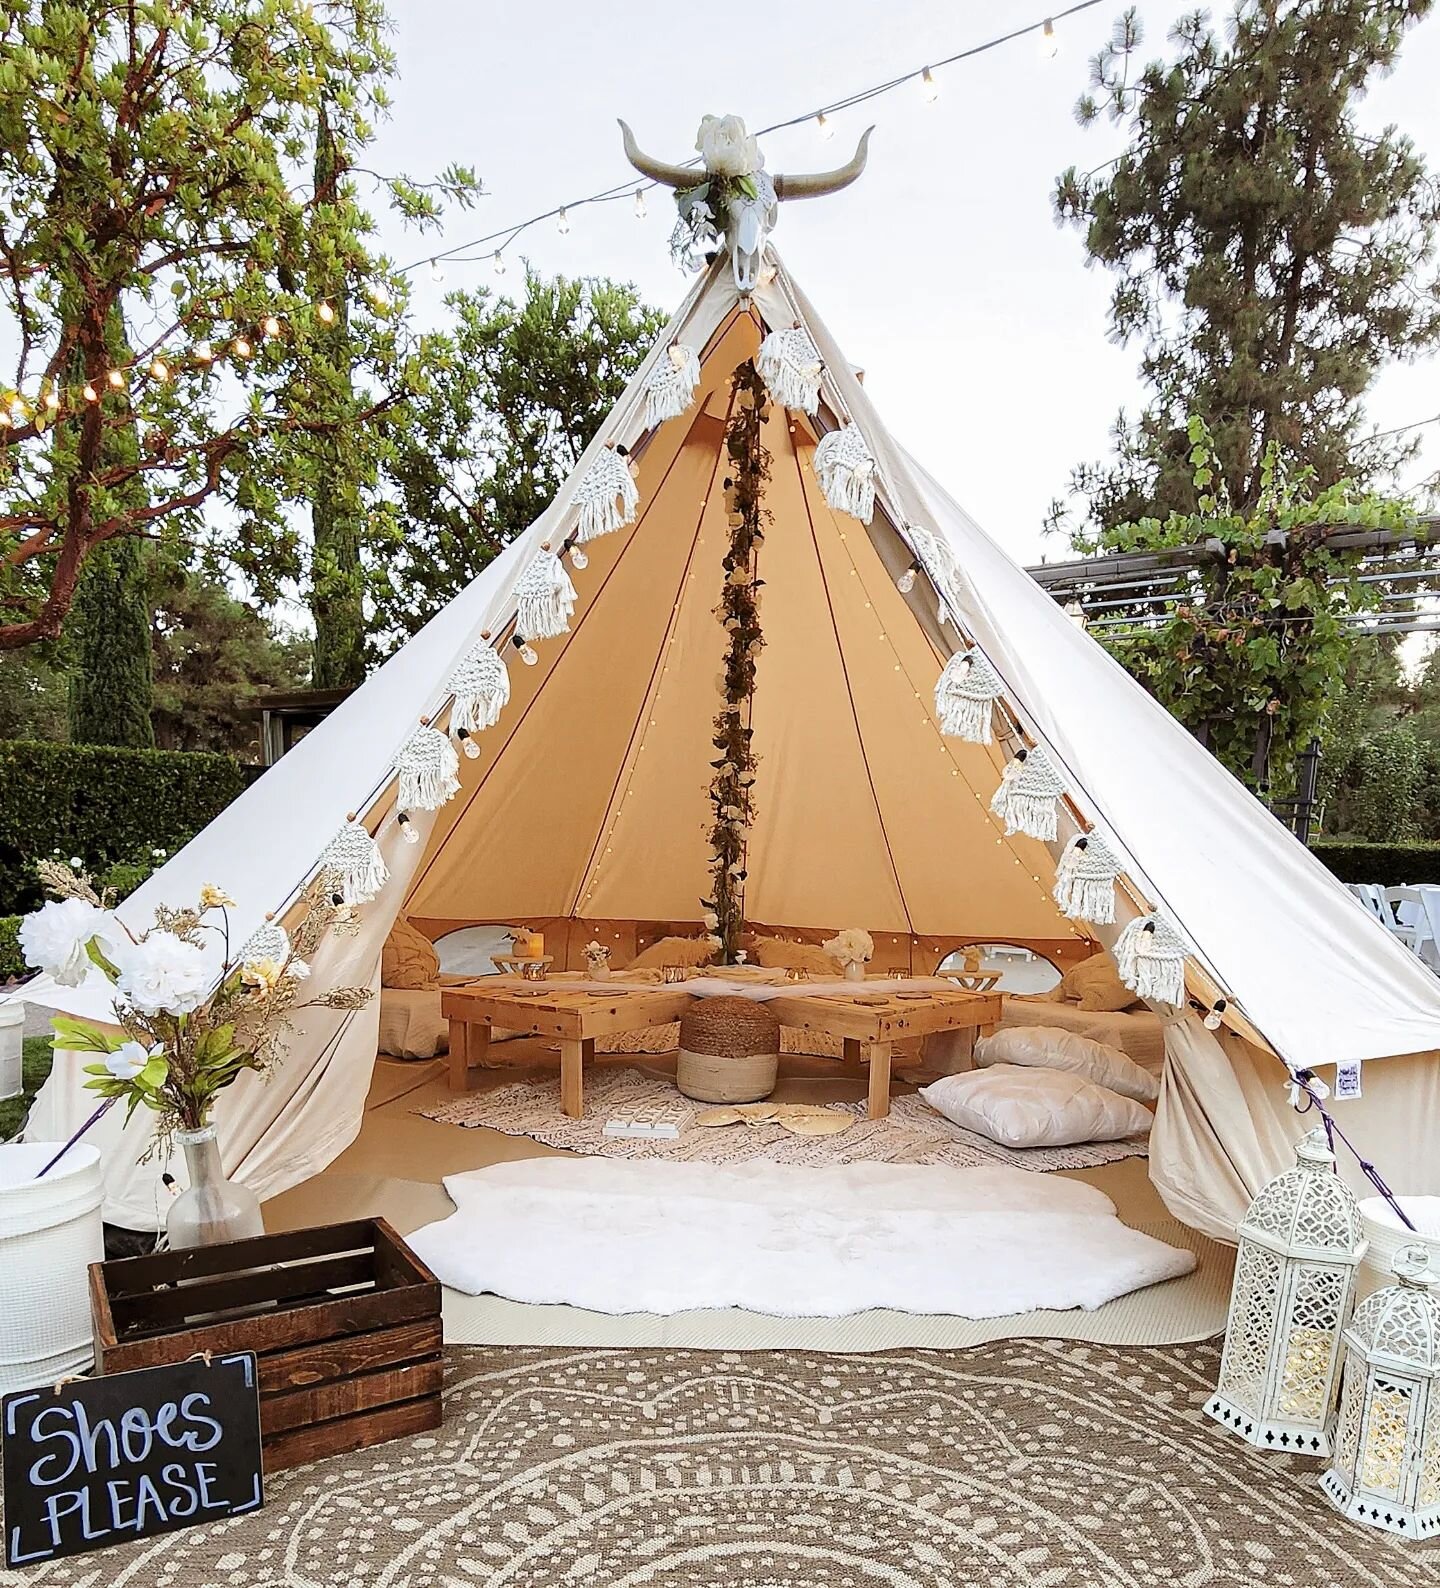 Another one of the Boho Lounge Tents we set up for the Corporate Event. ♡
.
.
Book yours today by heading to 
Sleepoverhaven.com! 
.
.
.
.
#sleepover #Sleepoverparty #teepeeParty #teepeetent #bohodecor #corporateevent #teepeesleepover #partyideas #bo